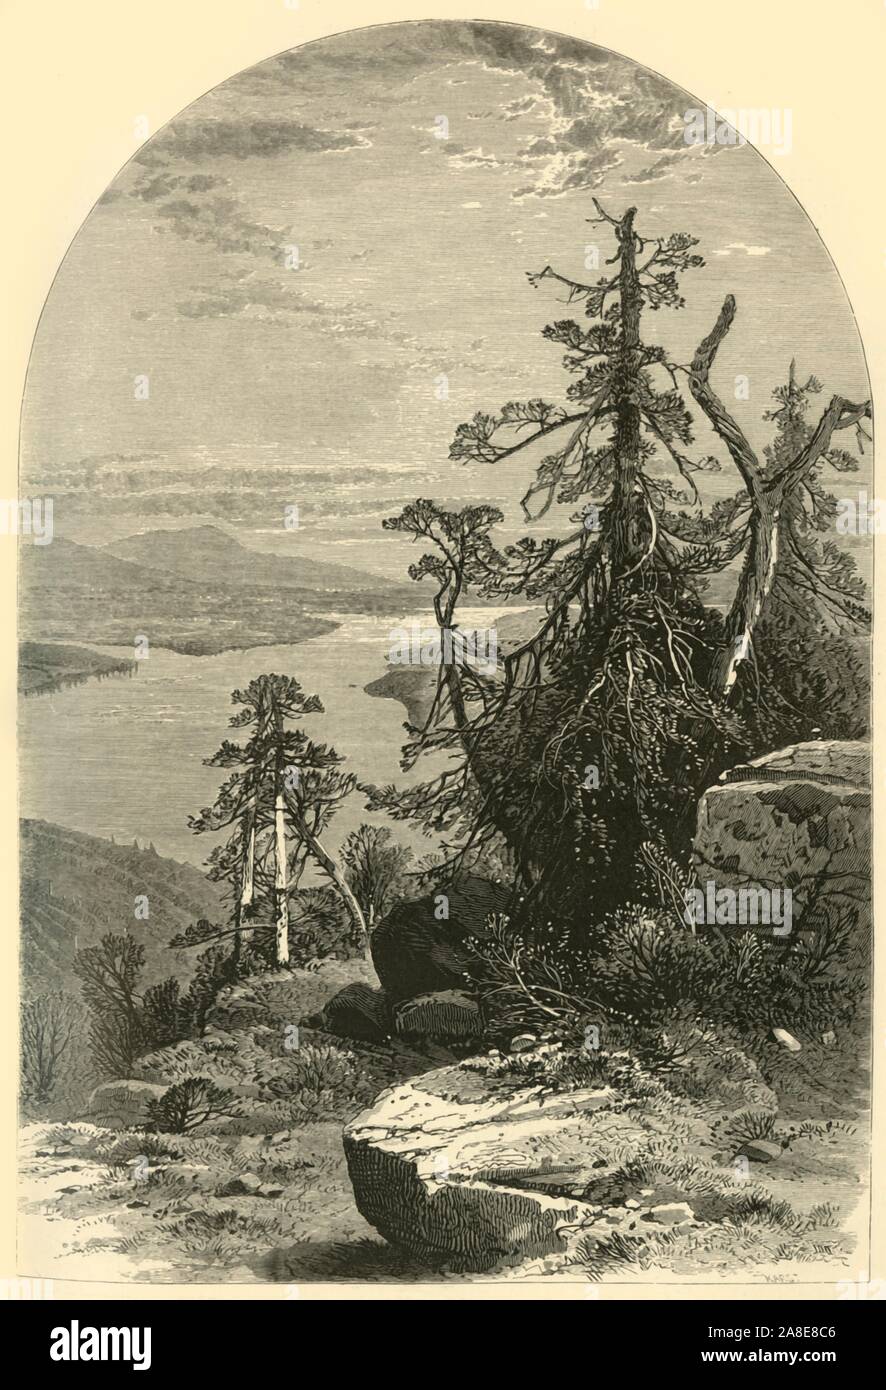 'Lake Memphremagog, North from Owl's Head', 1874. Mont Owl's Head is a mountain in Quebec, Canada. It is 747 metres (2,451 feet) high and overlooks Lake Memphremagog. From &quot;Picturesque America; or, The Land We Live In, A Delineation by Pen and Pencil of the Mountains, Rivers, Lakes...with Illustrations on Steel and Wood by Eminent American Artists&quot; Vol. II, edited by William Cullen Bryant. [D. Appleton and Company, New York, 1874] Stock Photo